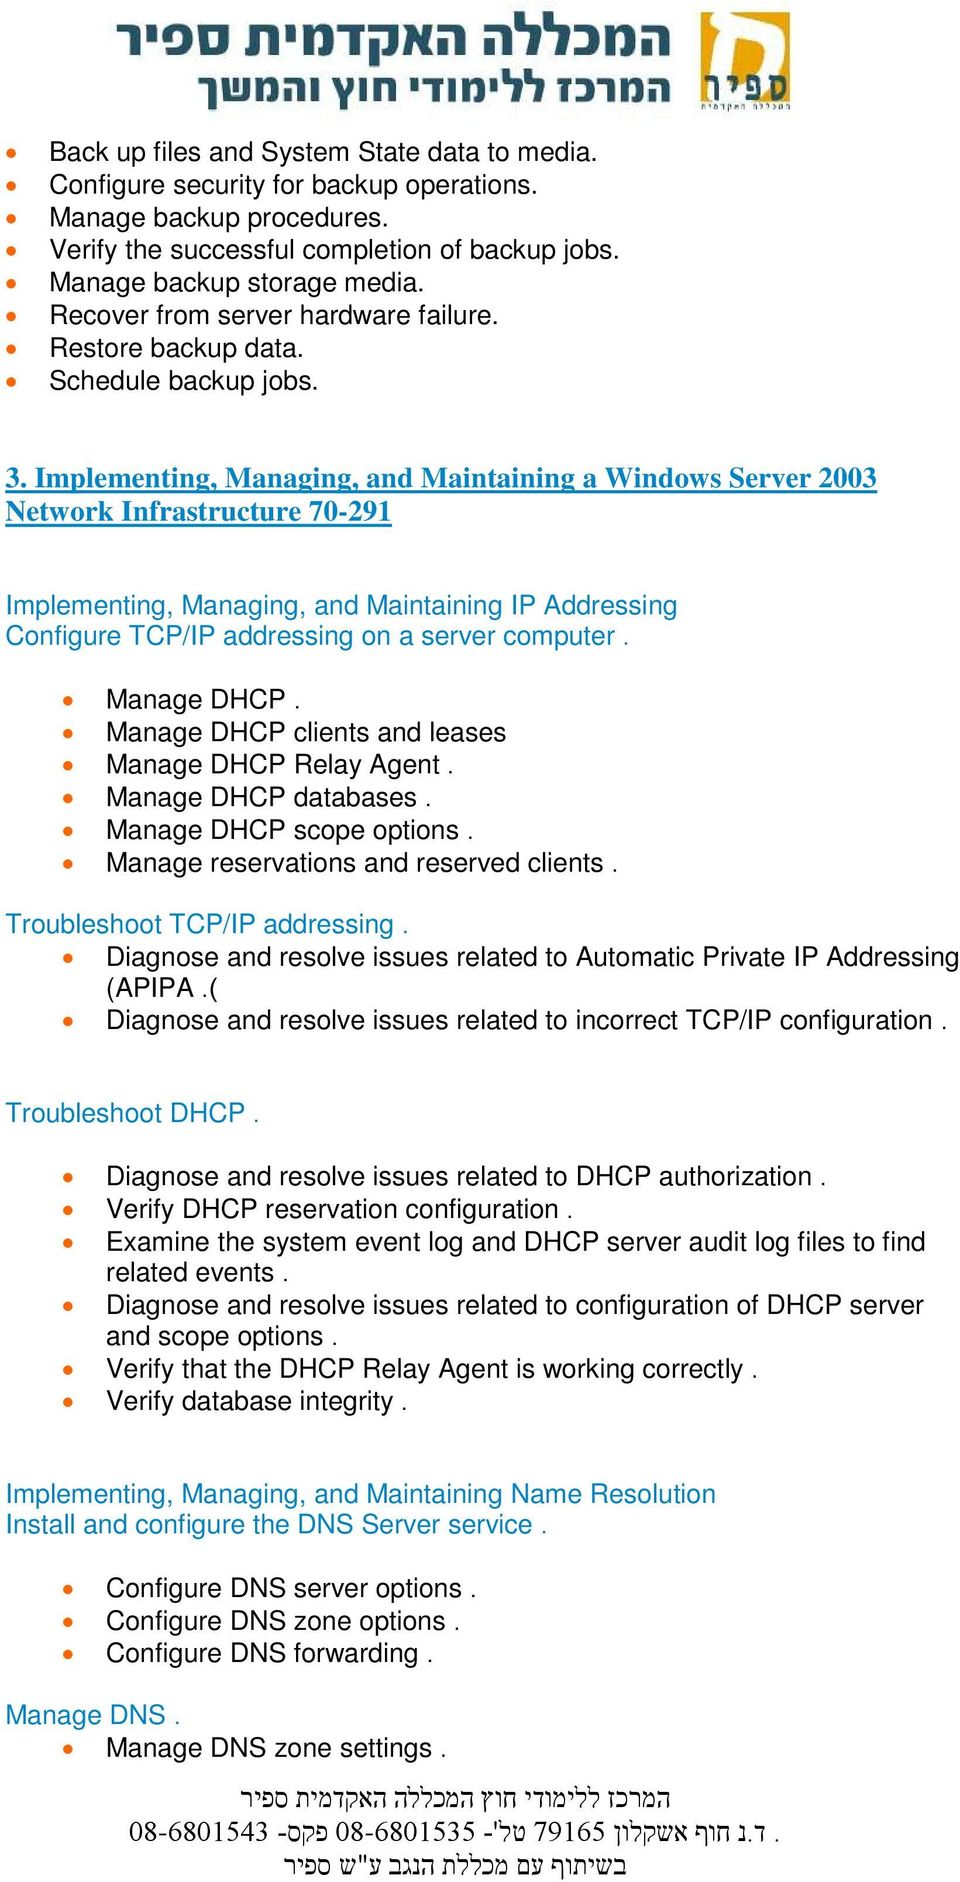 Implementing, Managing, and Maintaining a Windows Server 2003 Network Infrastructure 70-291 Implementing, Managing, and Maintaining IP Addressing Configure TCP/IP addressing on a server computer.